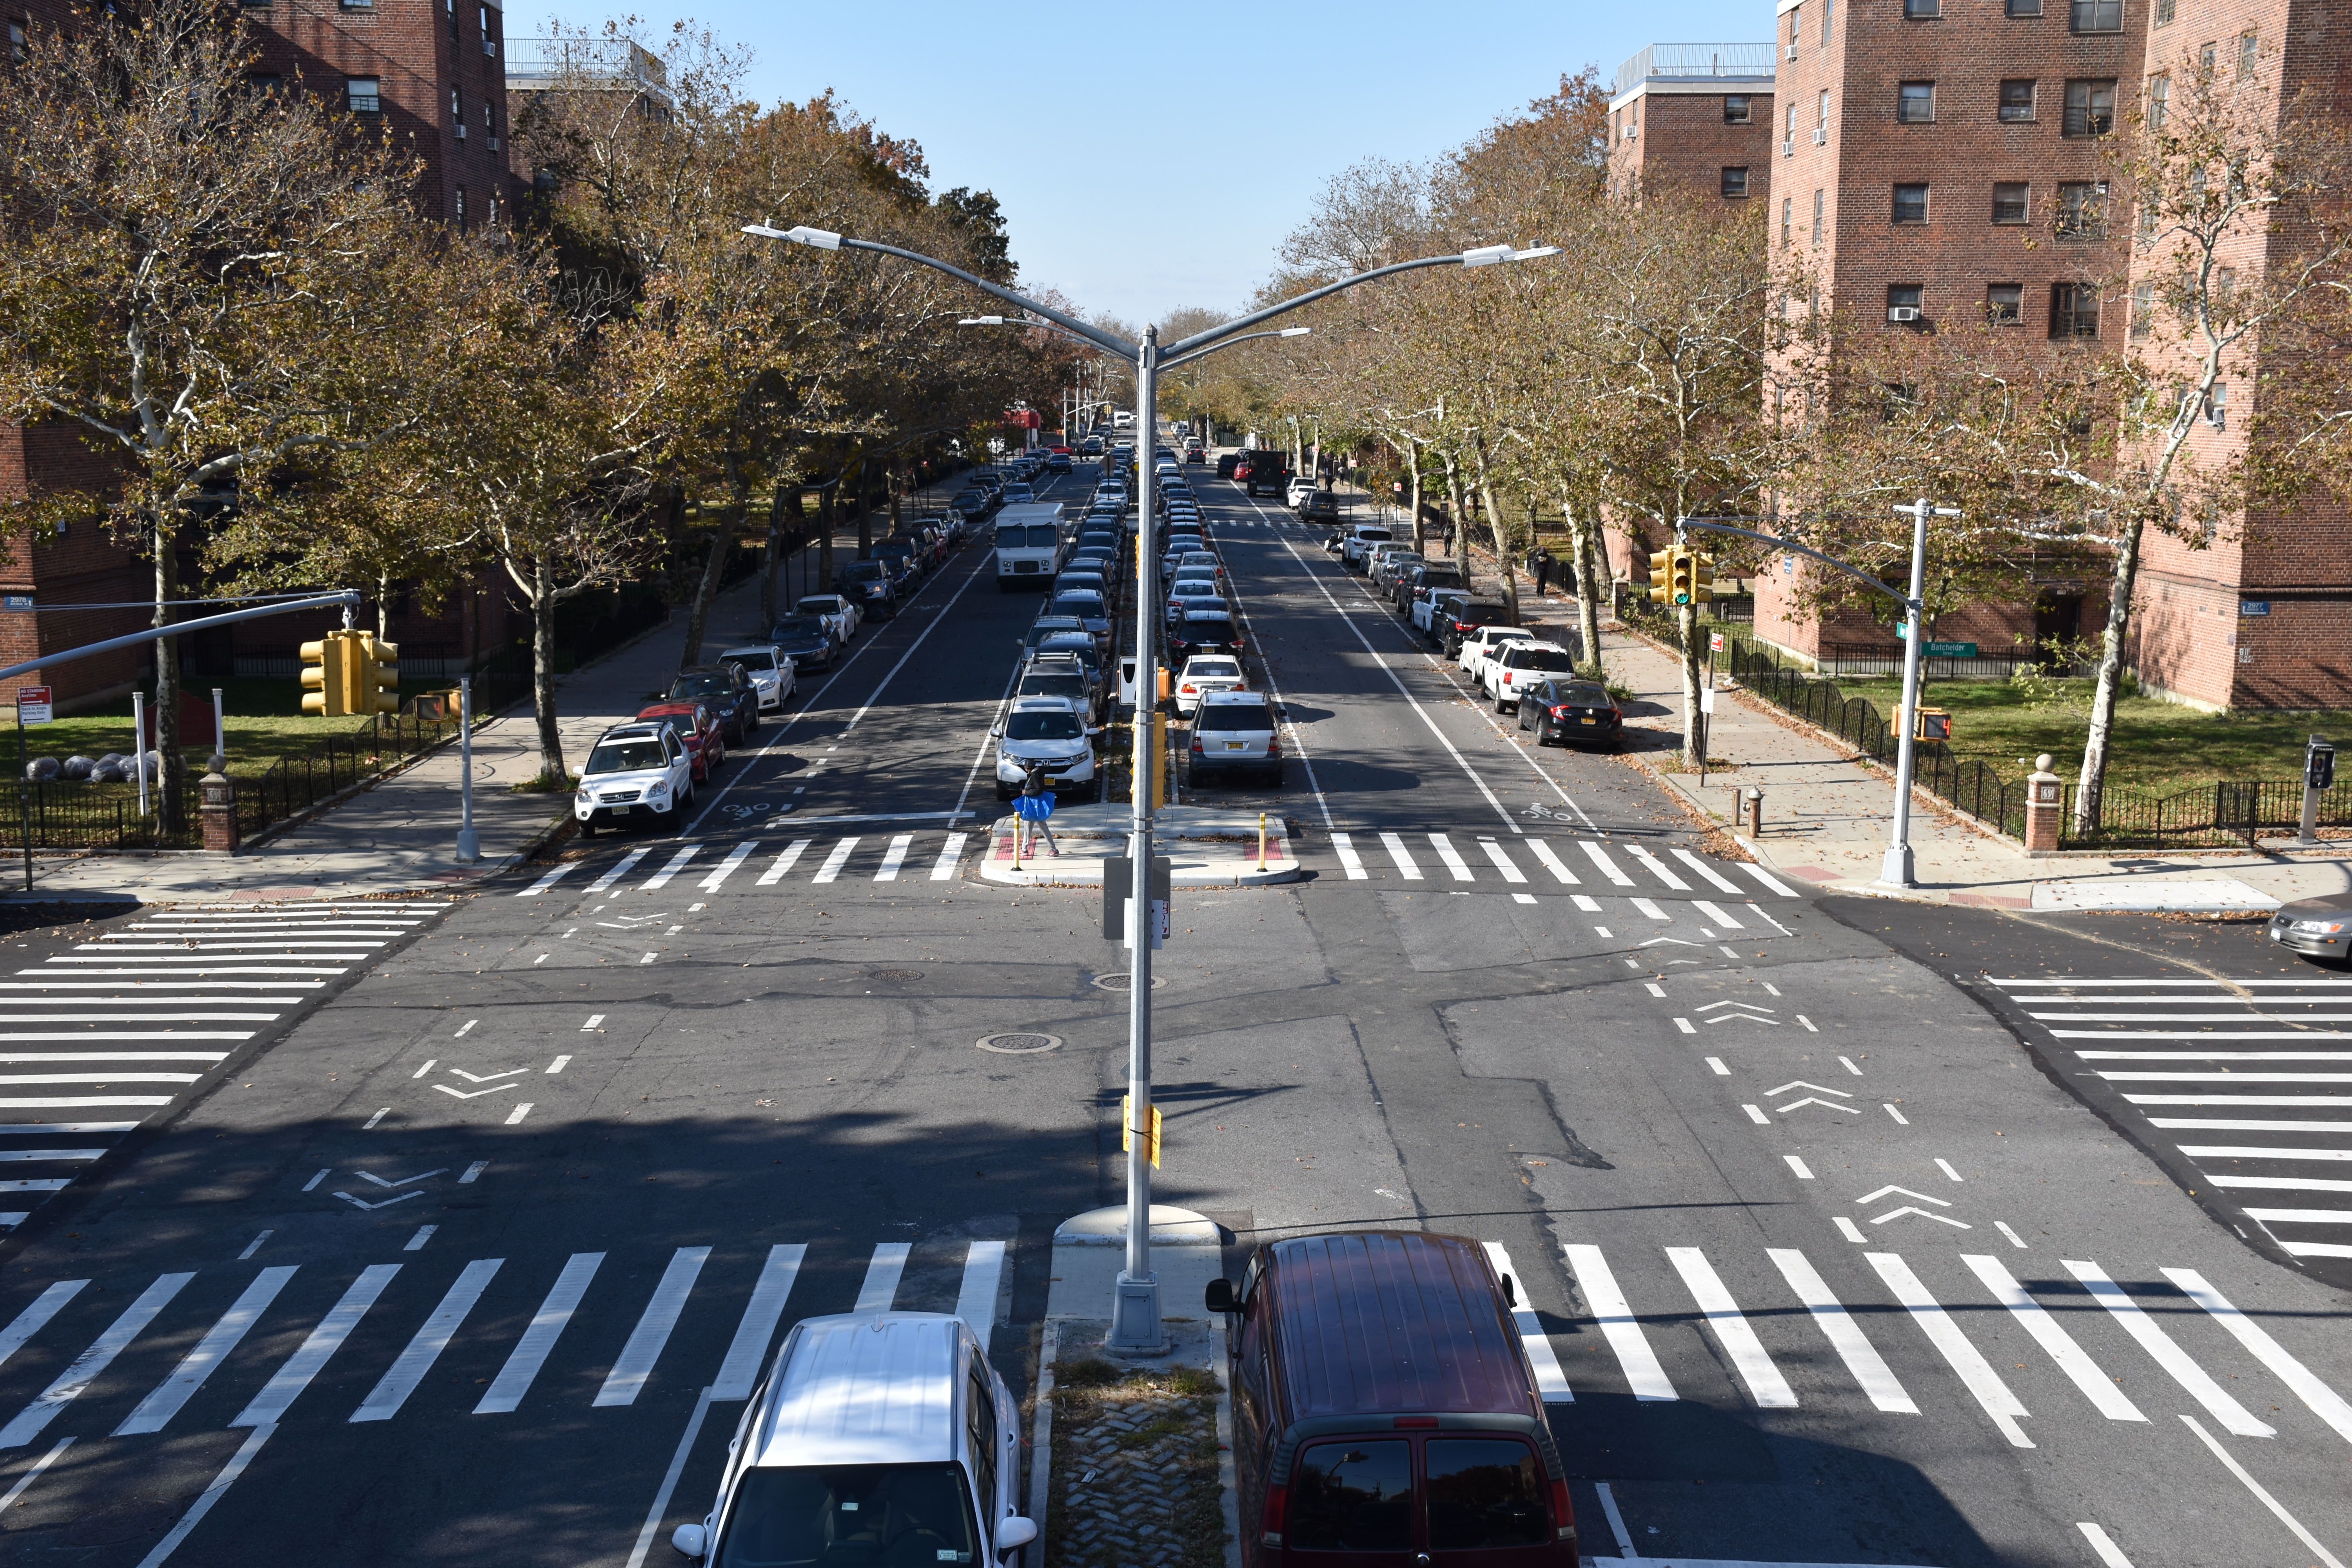 Birds eye view of an intersection with a two way street featuring four lanes of parking, pedestrian islands, and two-way bike lanes.